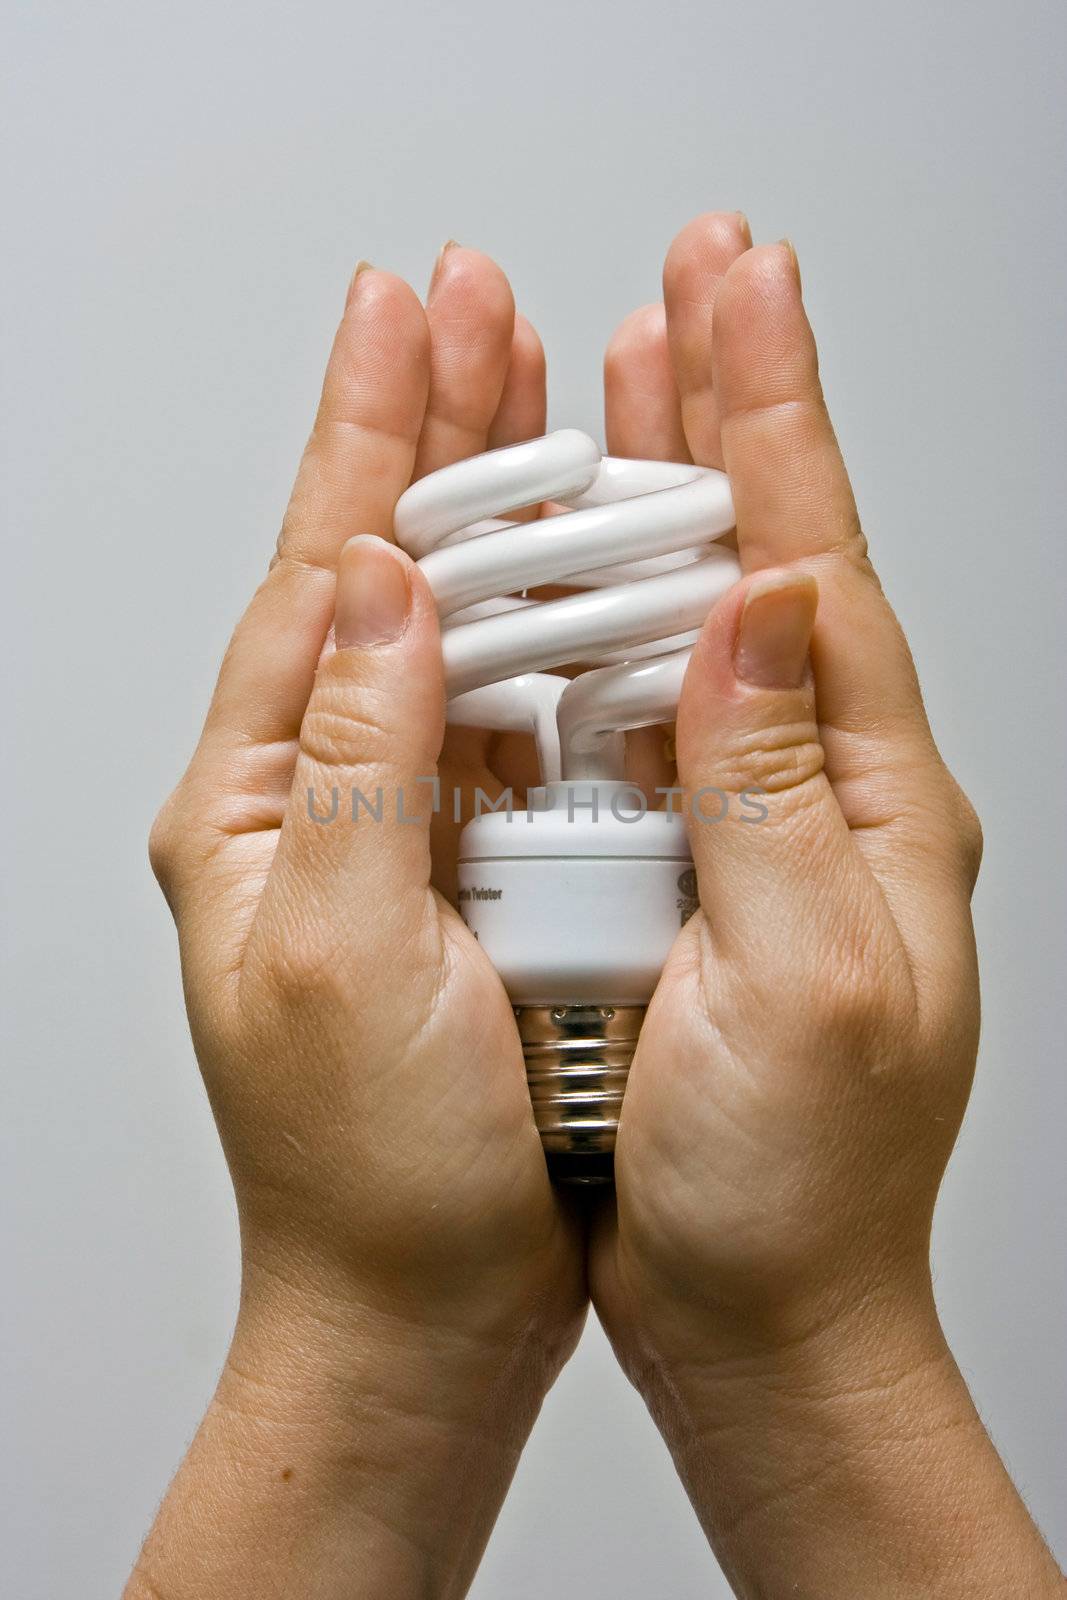 Two female hands presenting an environmental friendly and power saving fluorescent light bulb.